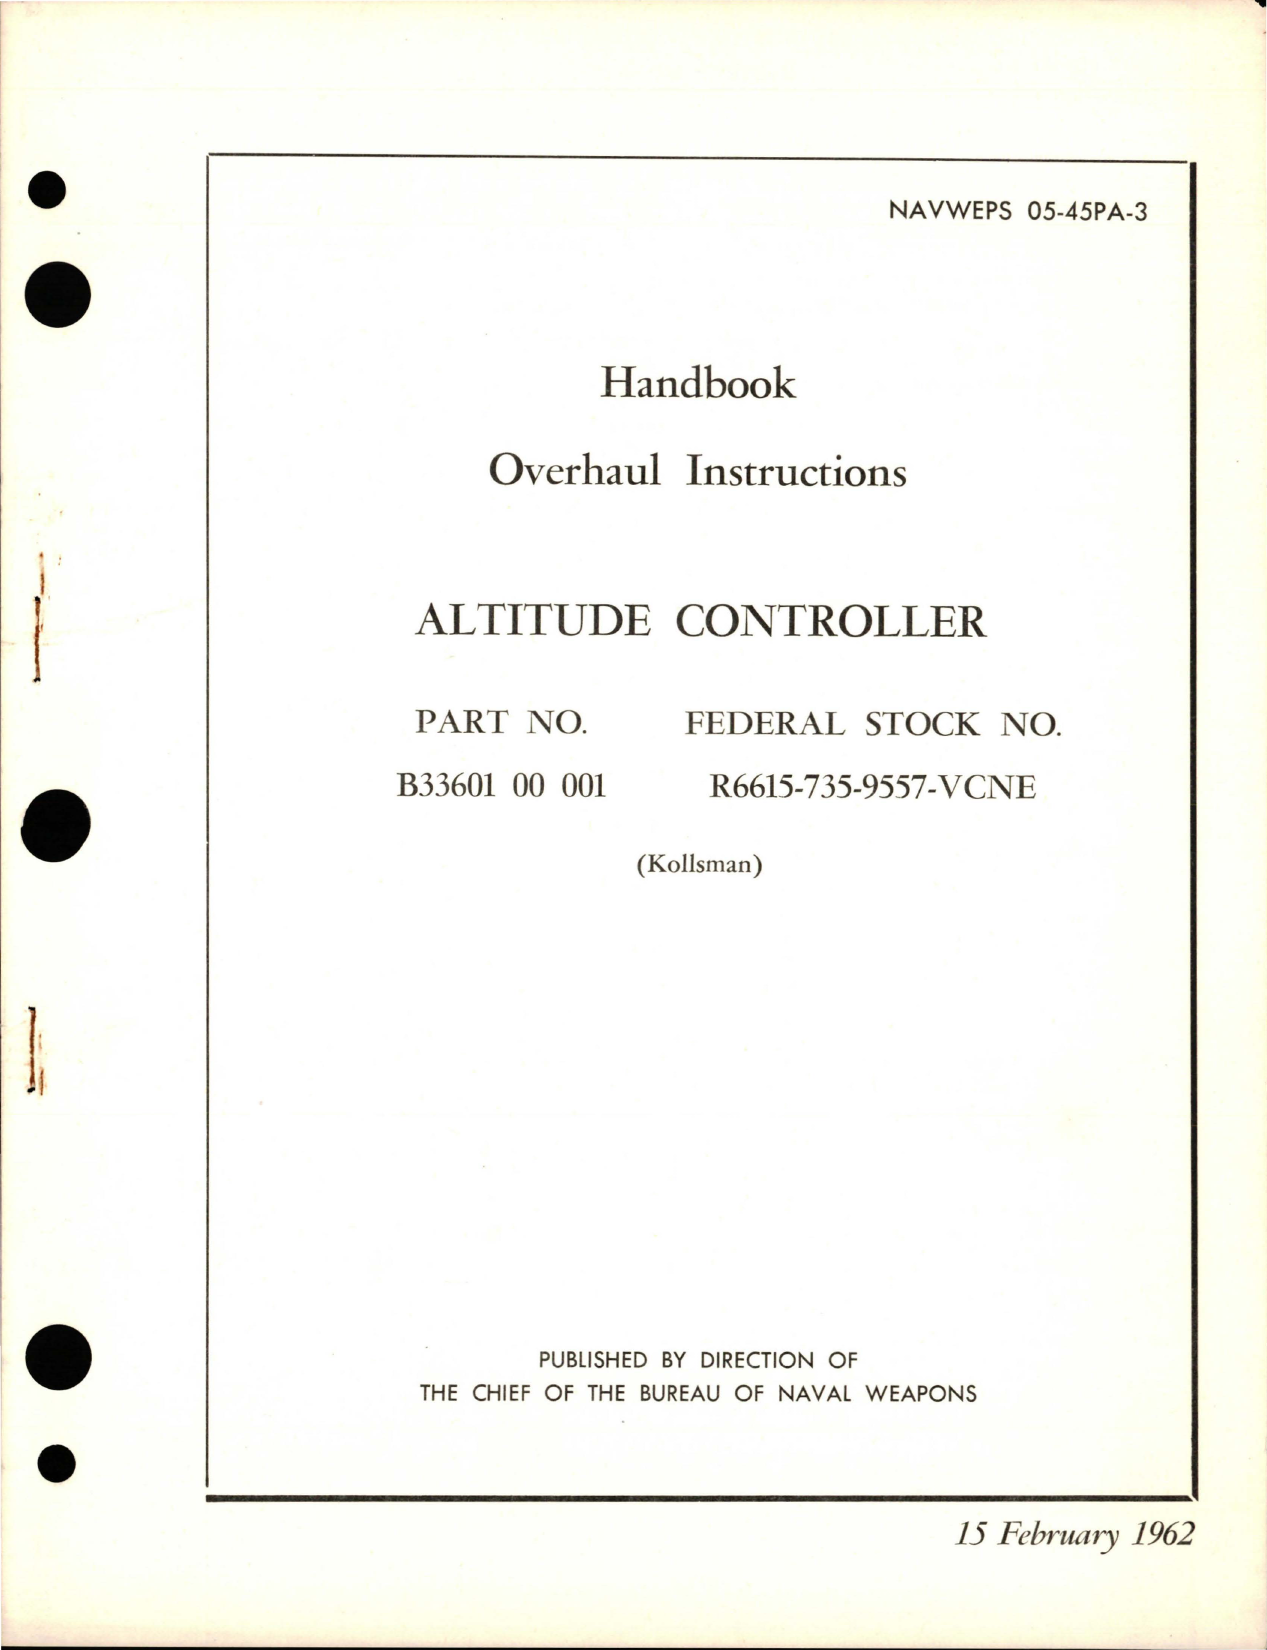 Sample page 1 from AirCorps Library document: Overhaul Instructions for Altitude Controller - Part B33601 00 001